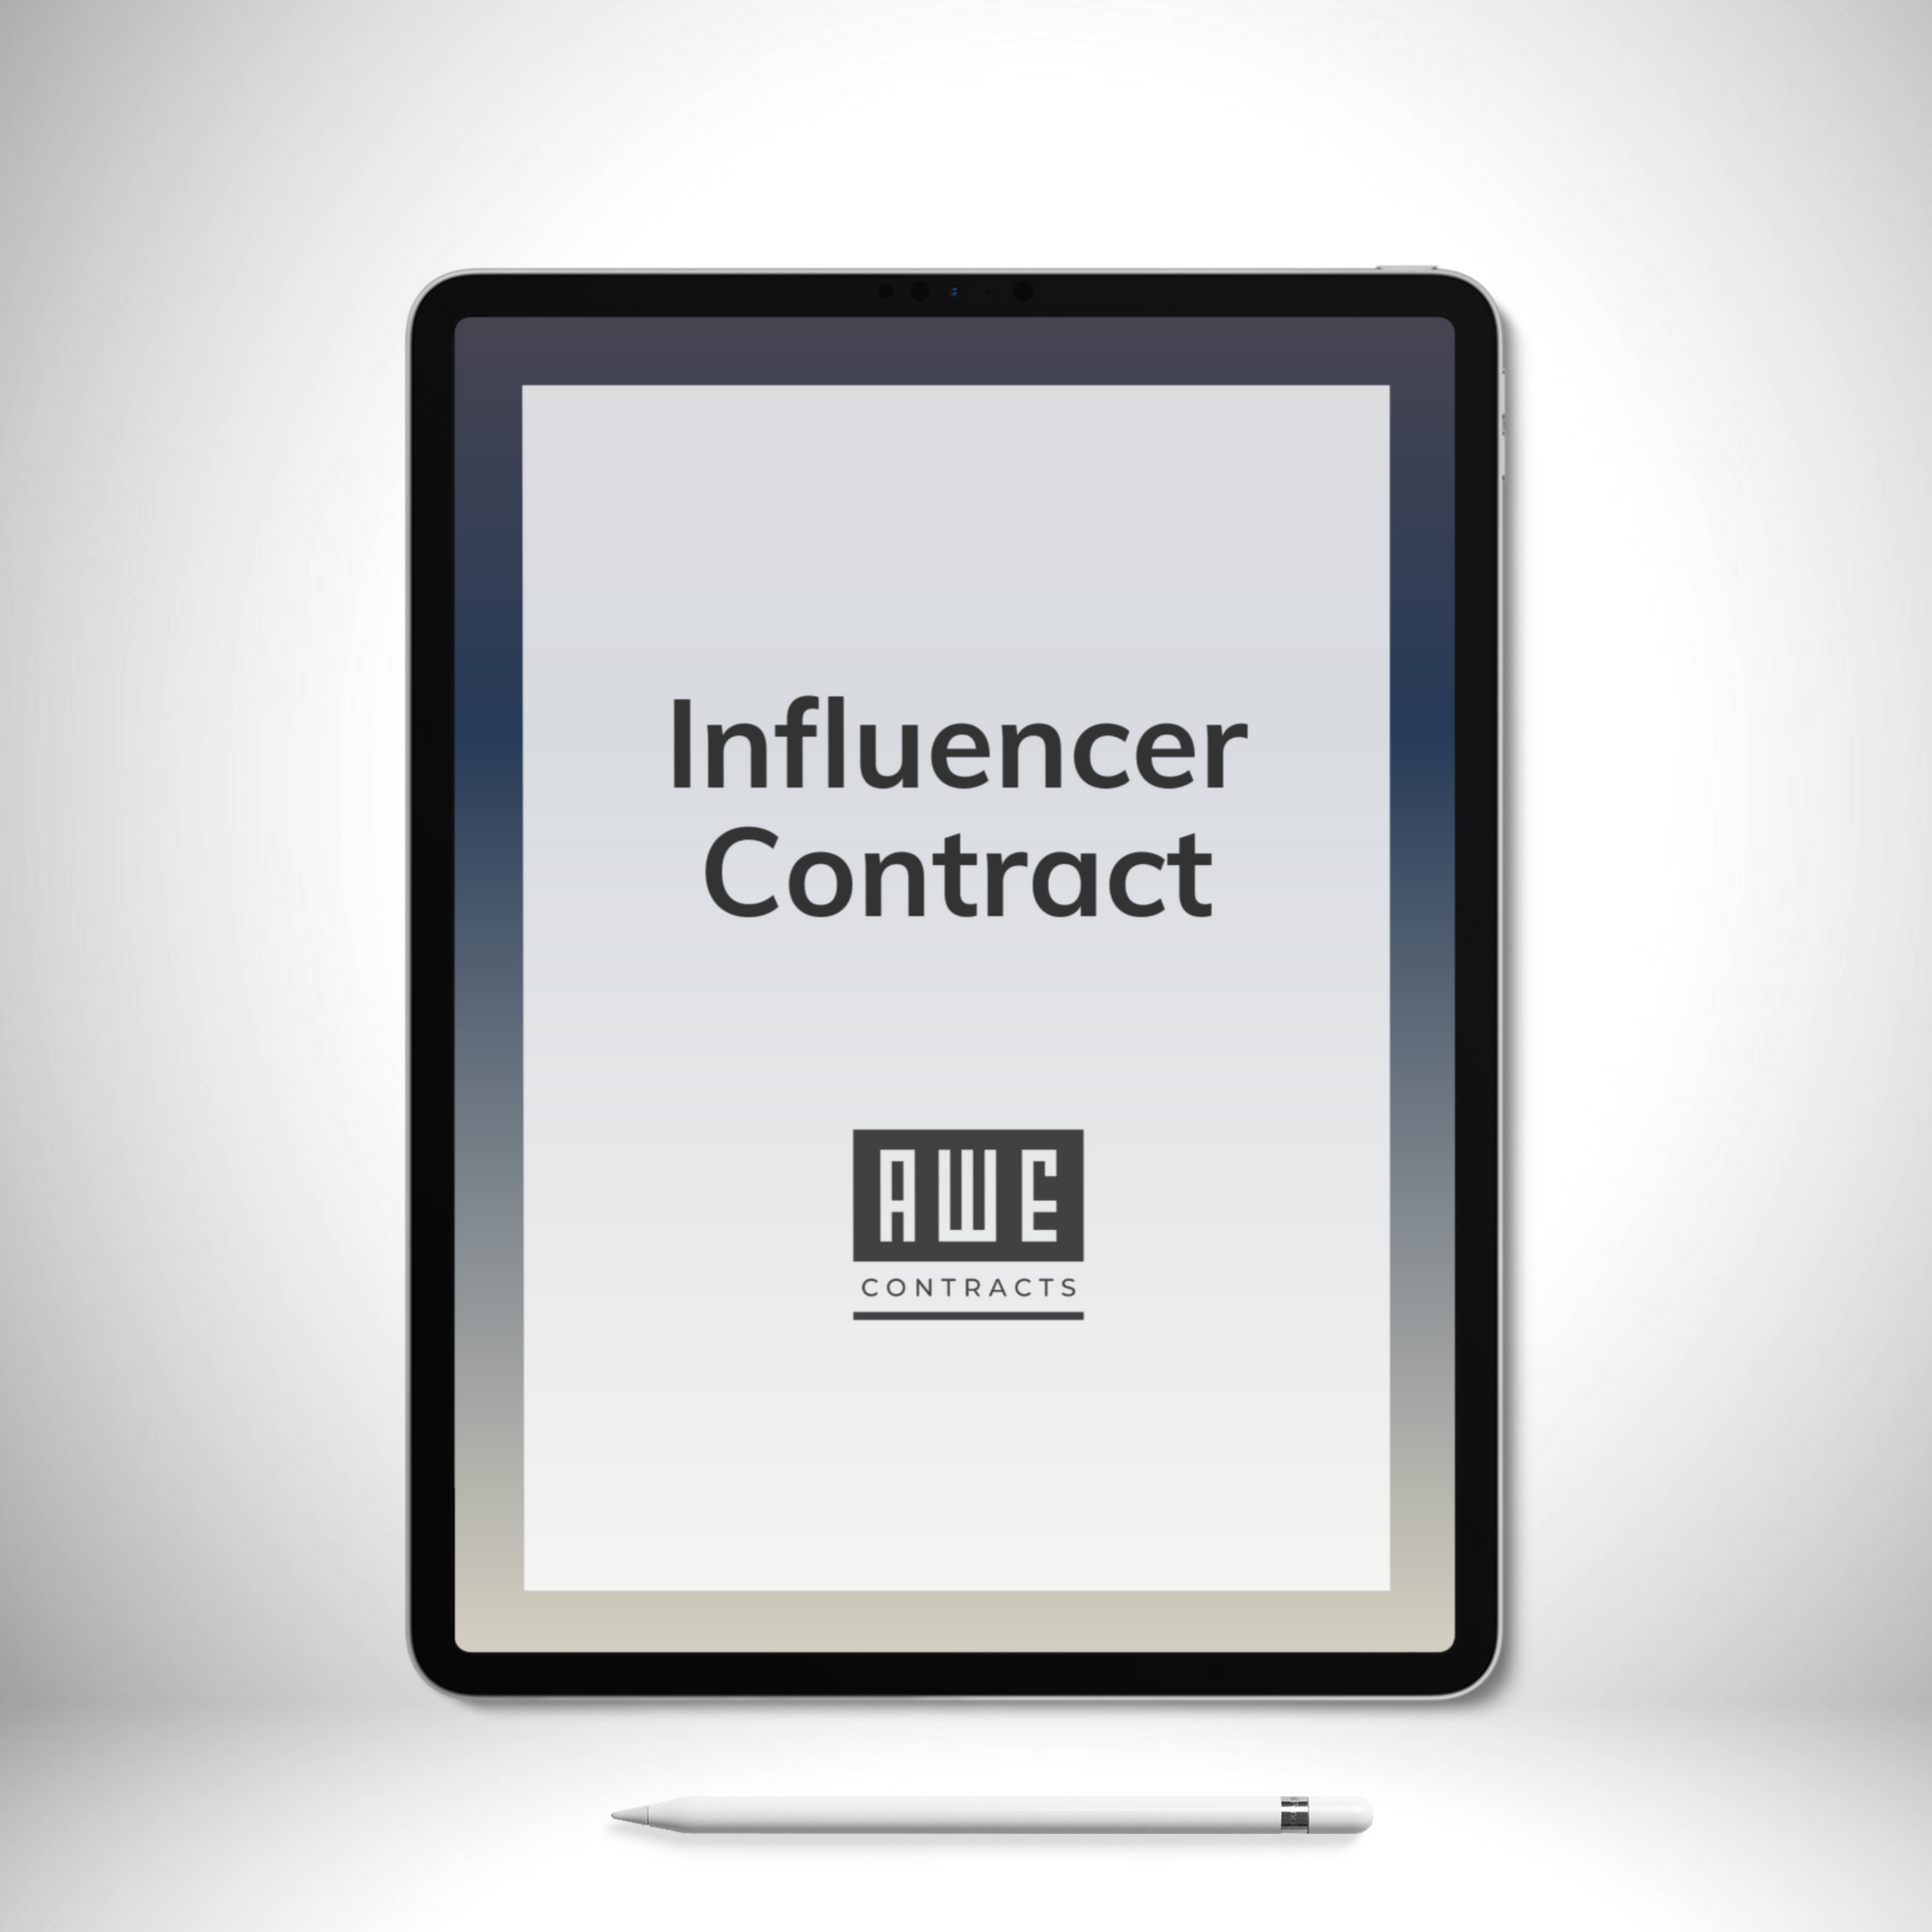 Influencer Contract